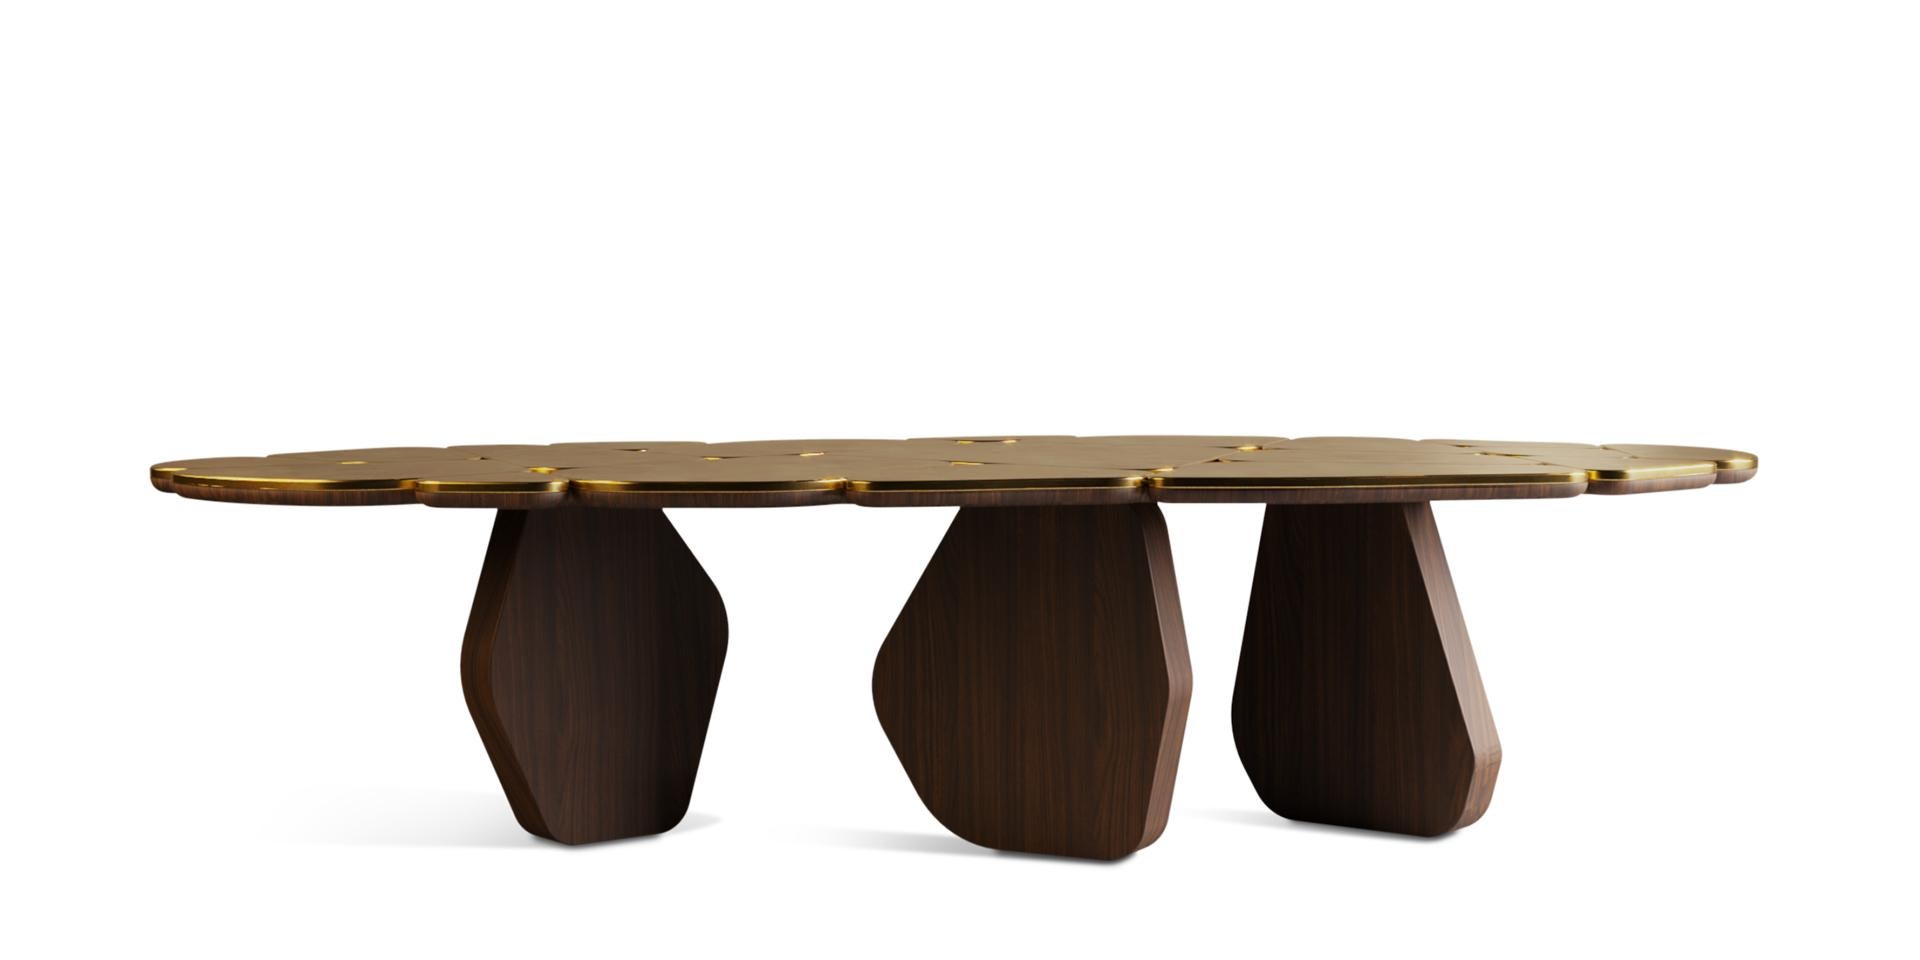 The Anta da Arca Dining Table has distinctive details that make it a delicate combination between the best-handcrafted walnut wood and the touch of gold leaf in shades.

This piece was designed for moments of conviviality, sharing these legends,